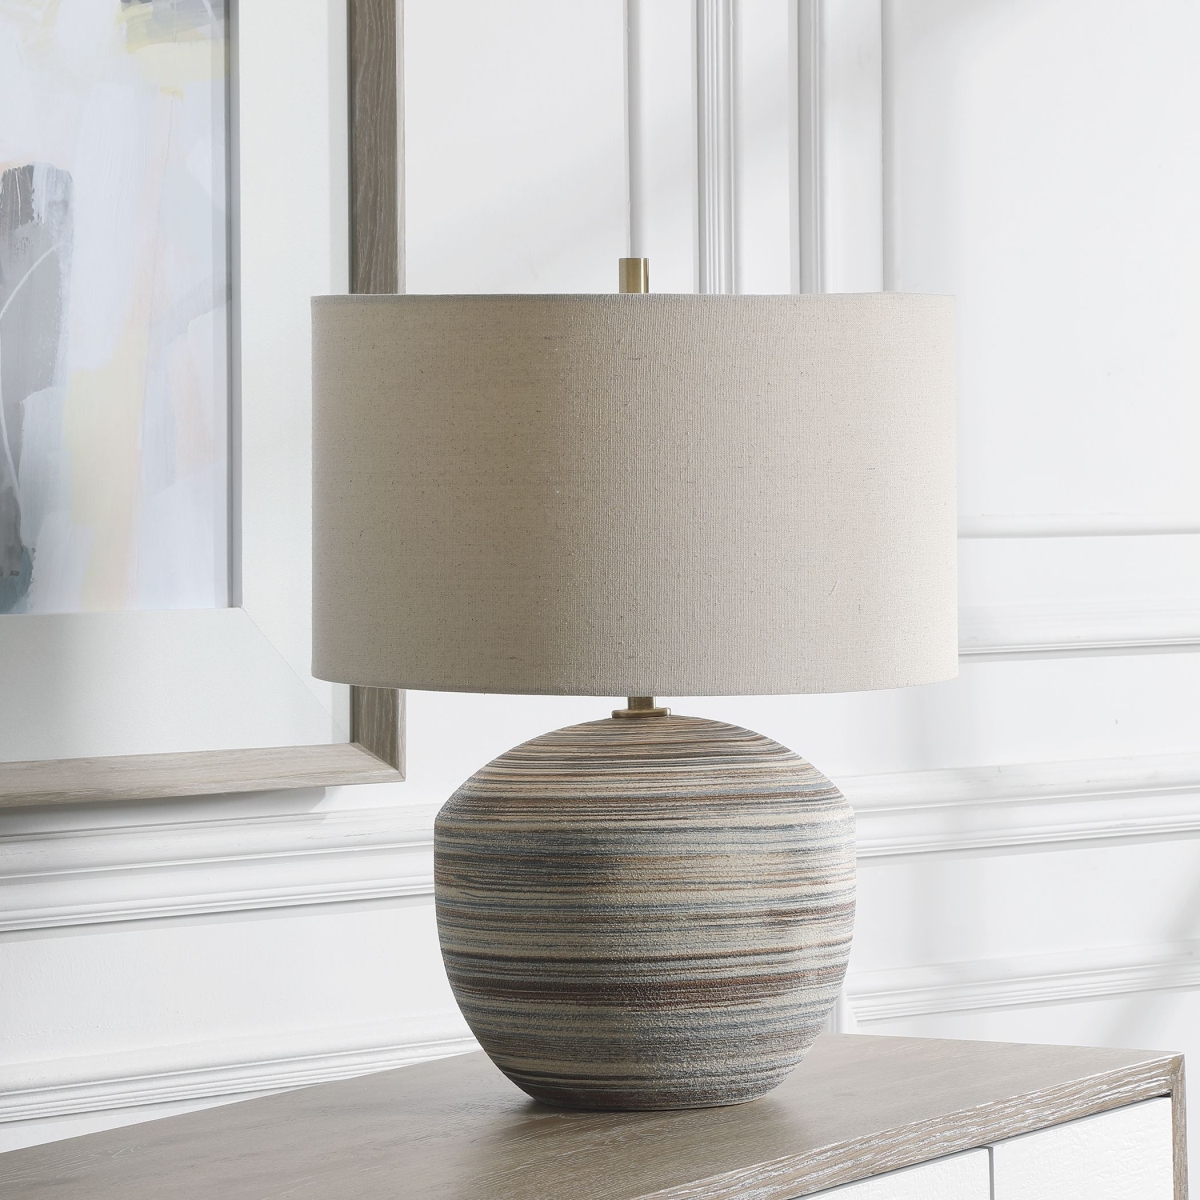 Picture of 212 Main 28441-1 Prospect Striped Accent Lamp - 18.5 x 18.5 x 18.5 in.